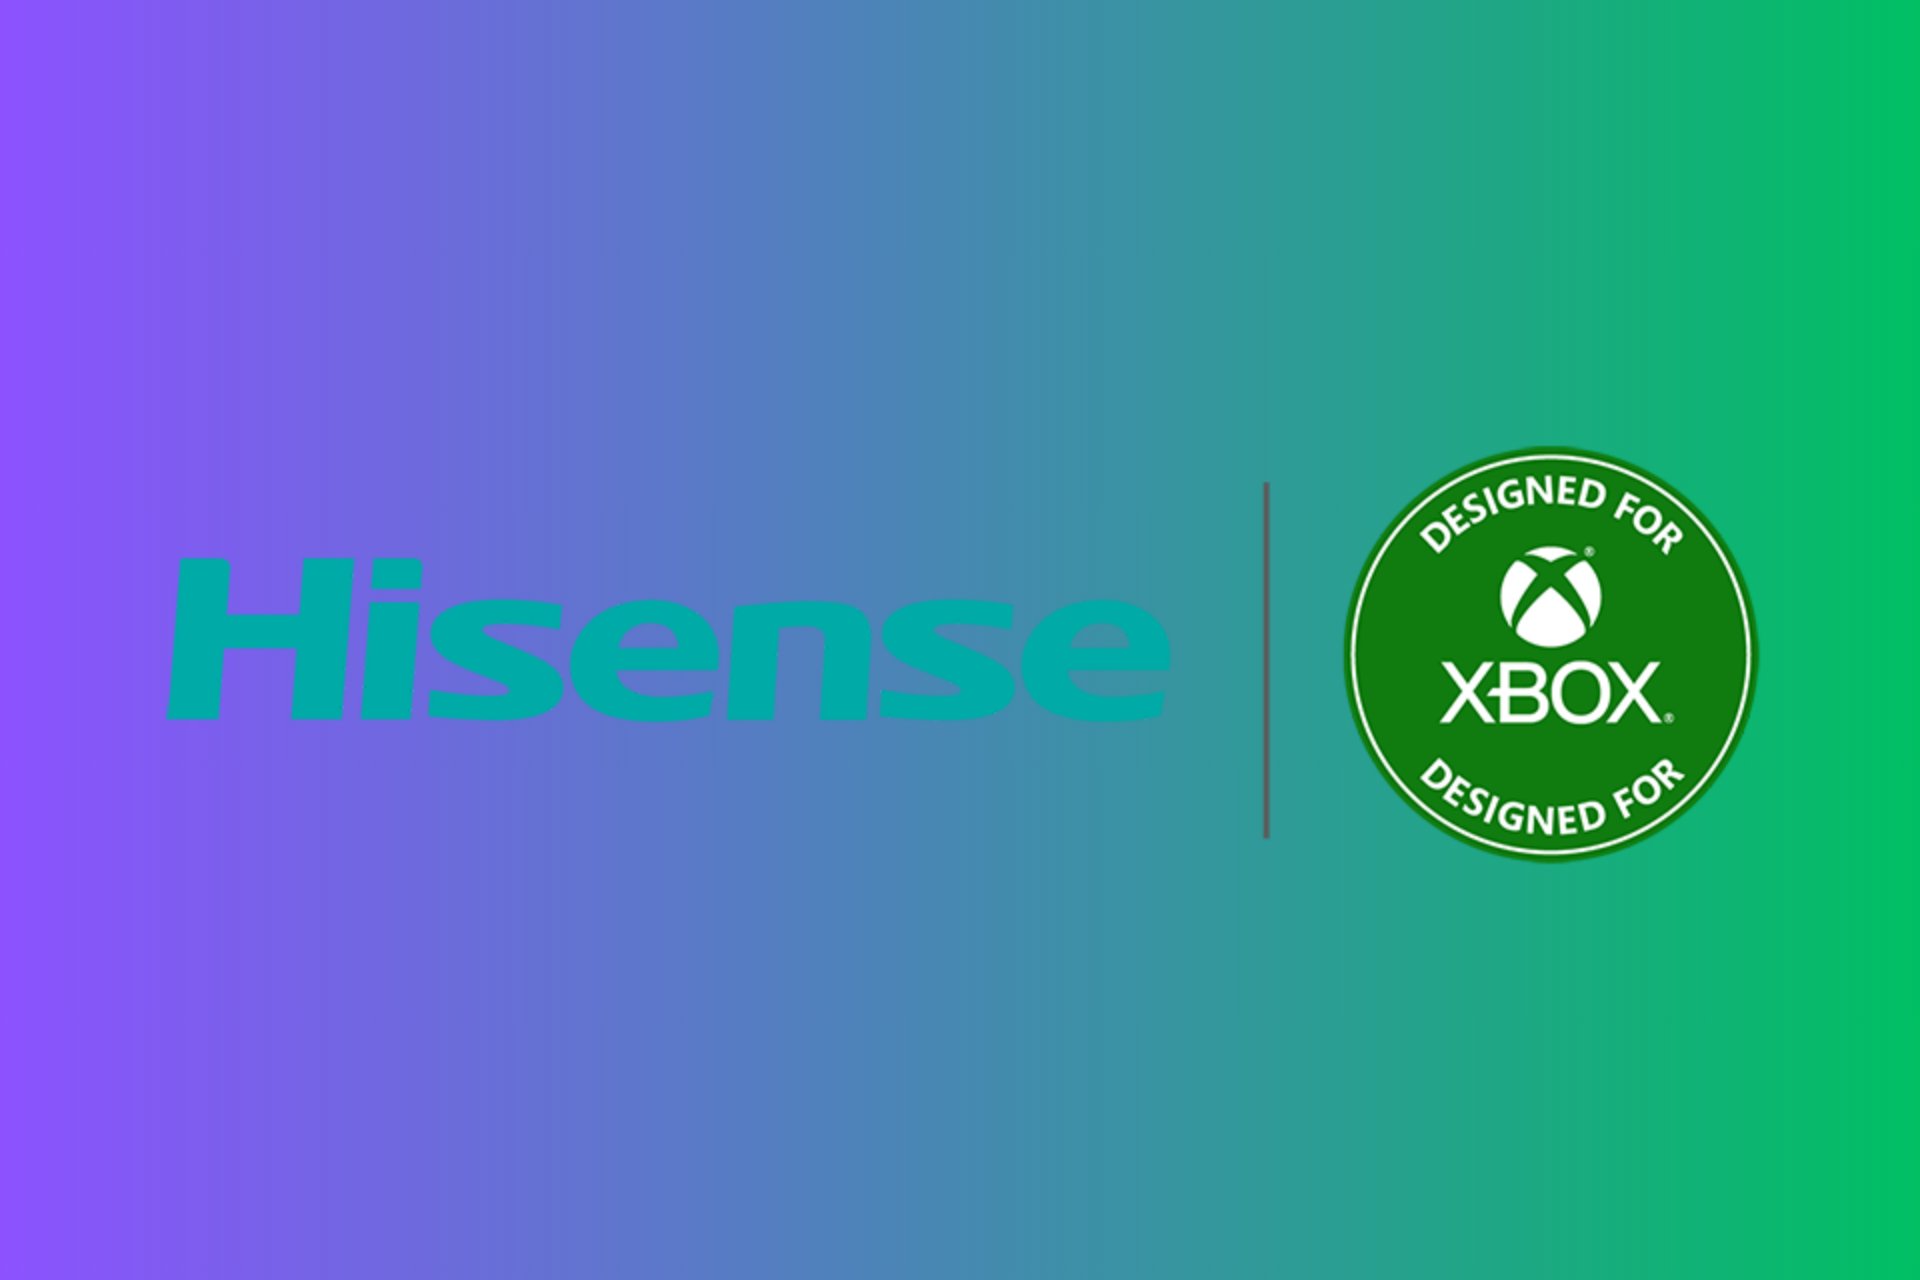 Hisense teams up with Xbox to bring you gaming-ready laser TVs